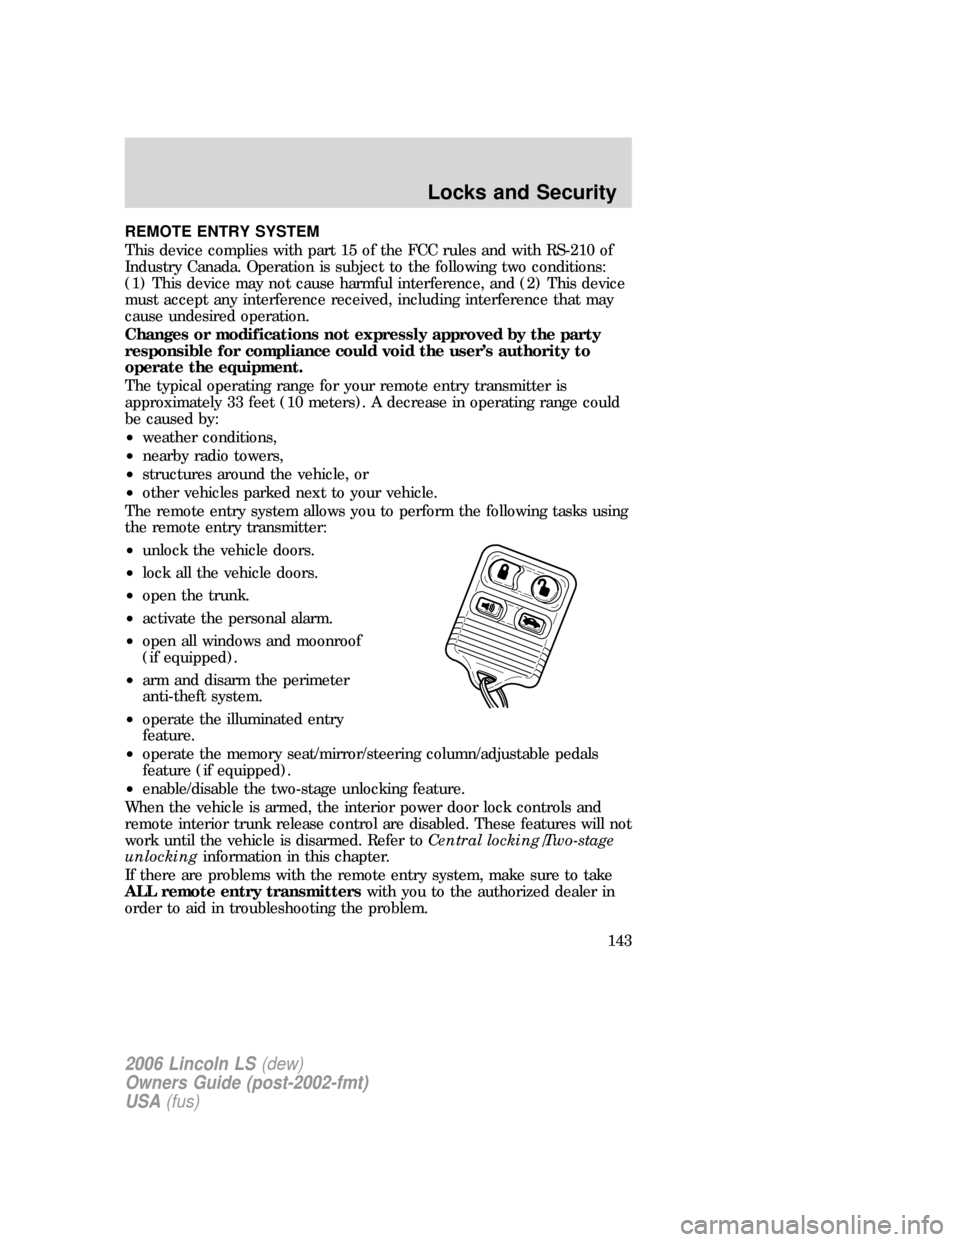 LINCOLN LS 2006  Owners Manual REMOTE ENTRY SYSTEM
This device complies with part 15 of the FCC rules and with RS-210 of
Industry Canada. Operation is subject to the following two conditions:
(1) This device may not cause harmful i